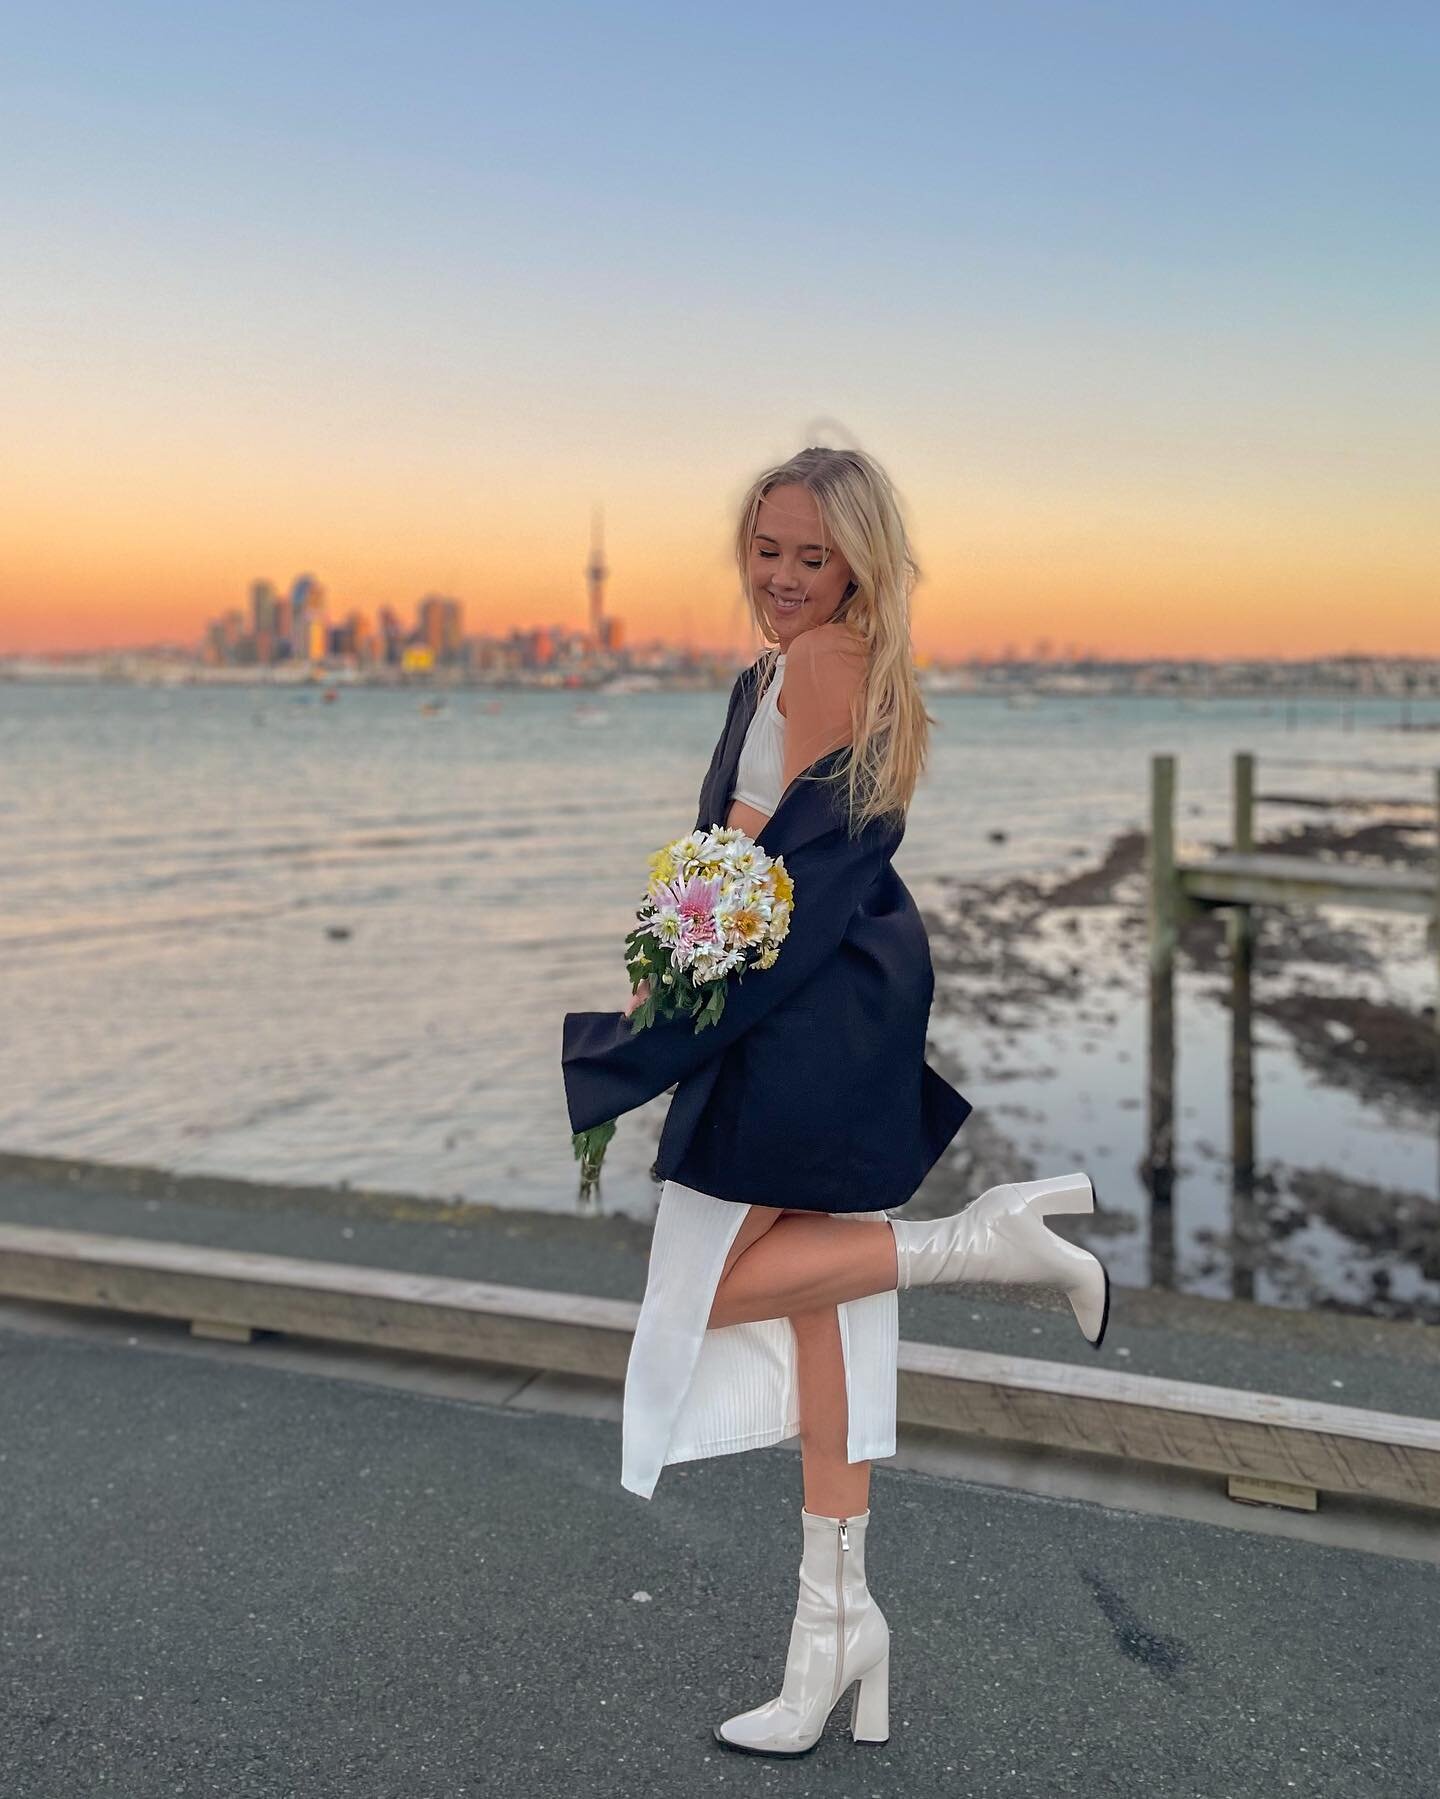 Ad/ Enjoying the beautiful winter sunset in my new @princesspollyboutique fit!

This is the Ellie set paired with the Wyoming Blazer and Barcelona Boot! Check out my new reel for more outfit inspo!! 🤍 use my code HR20 for 20% off!!